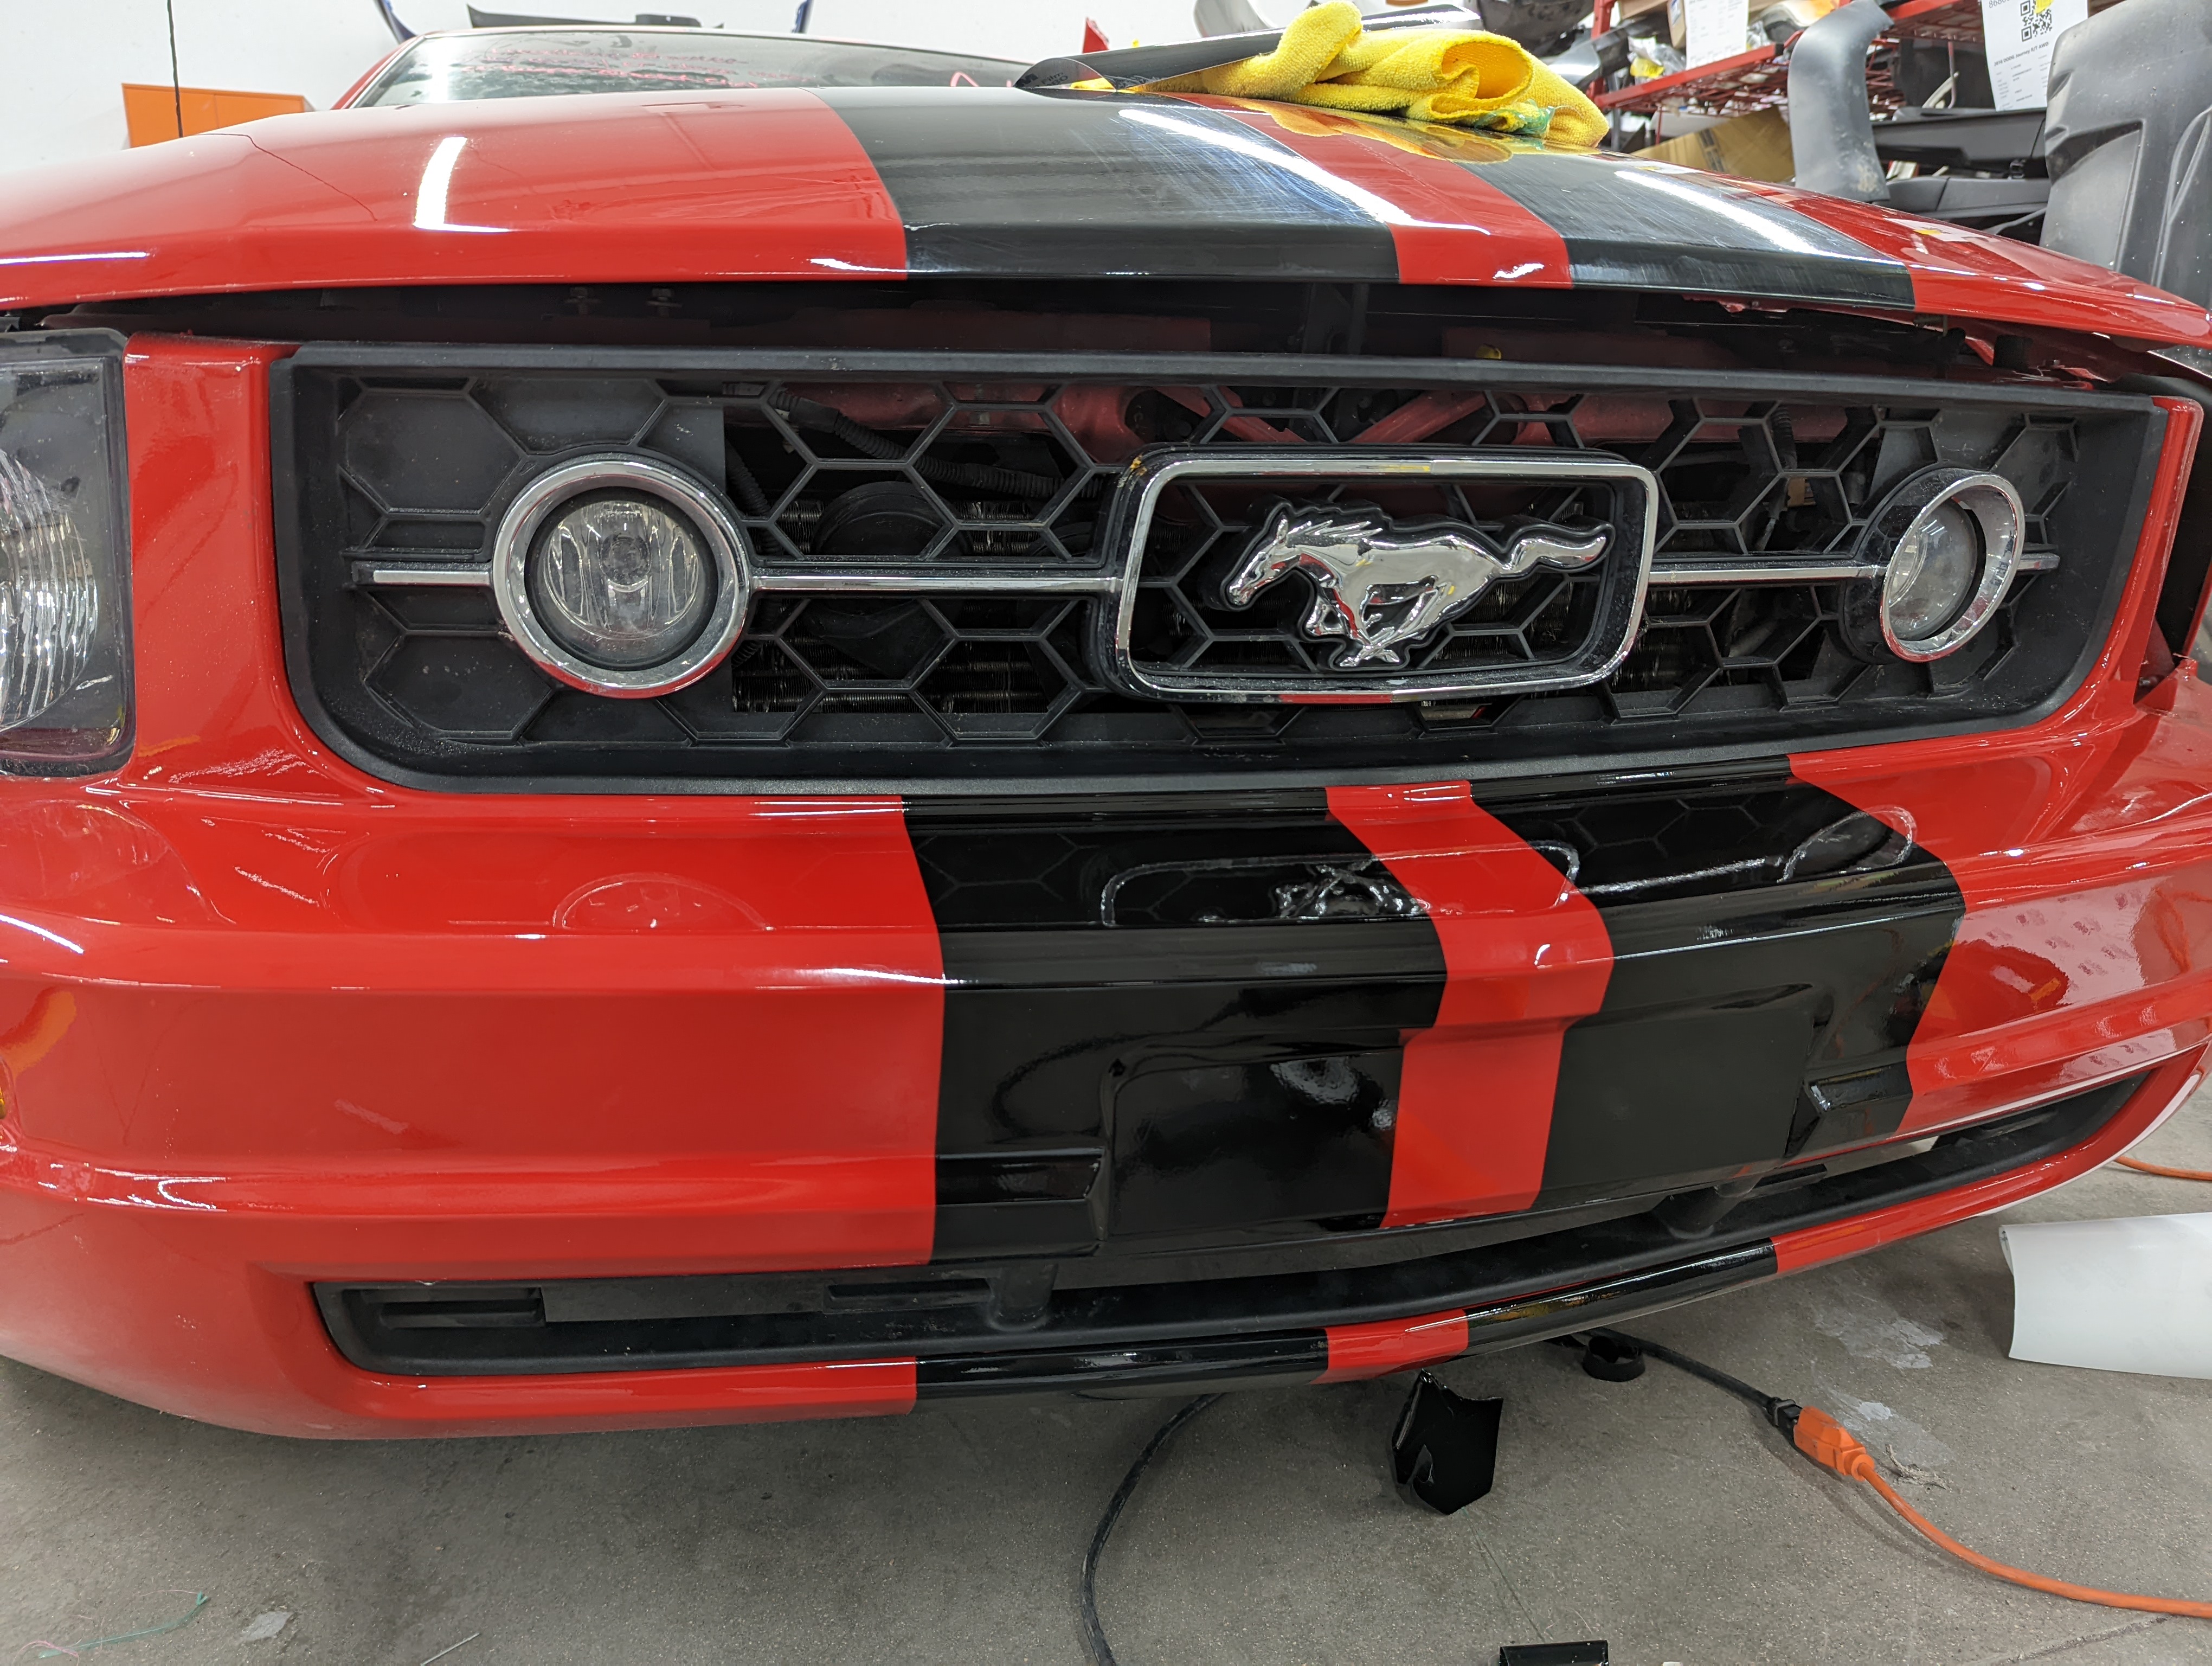 2006 Ford Mustang Vinyl Stripes. Front bumper finished after knife-less tape and excess removed.